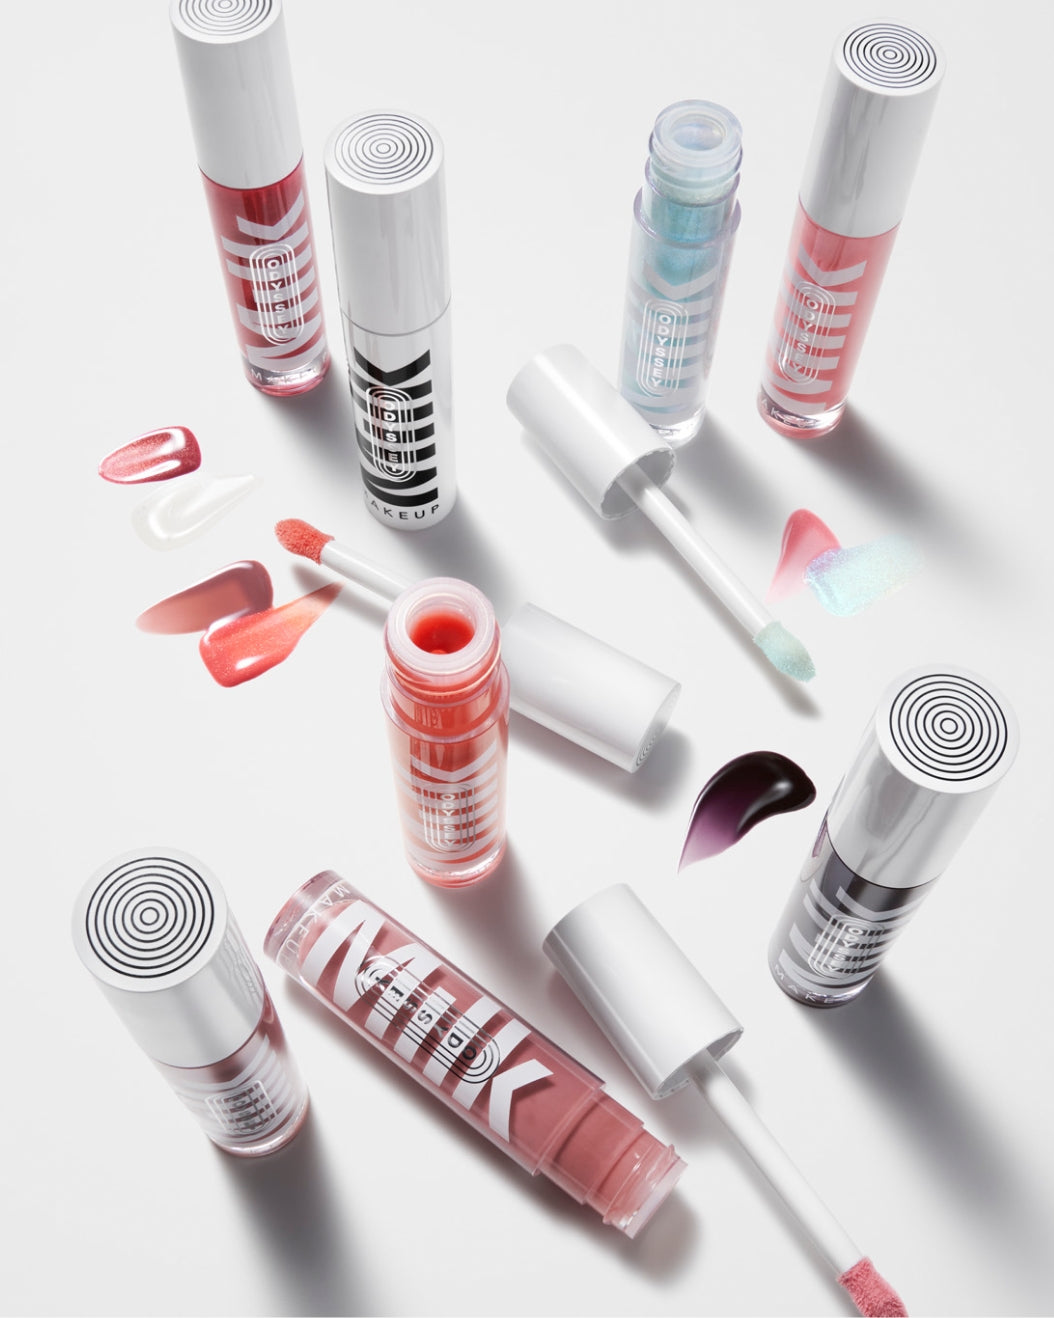 Product shot of every tube of Milk Makeup Odyssey Lip Oil Gloss arranged with their swatches and applicators, on a white background.